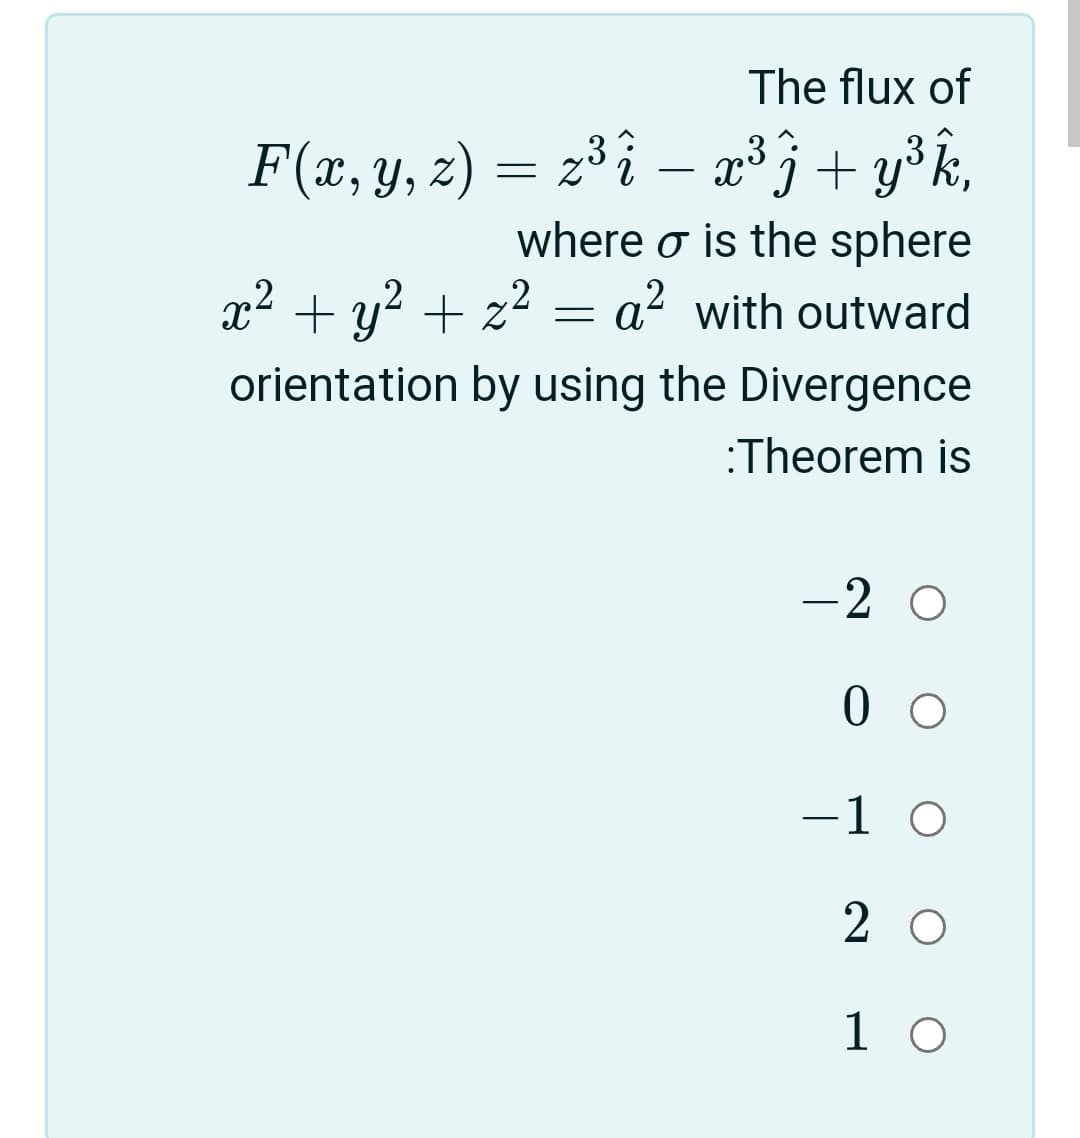 The flux of
F(x, y, z) = 2³ î – æ³j+ y³k,
-
where o is the sphere
x2 + y? + z2 =
a? with outward
orientation by using the Divergence
:Theorem is
-2 O
0 0
-1 O
2 O
1 0
